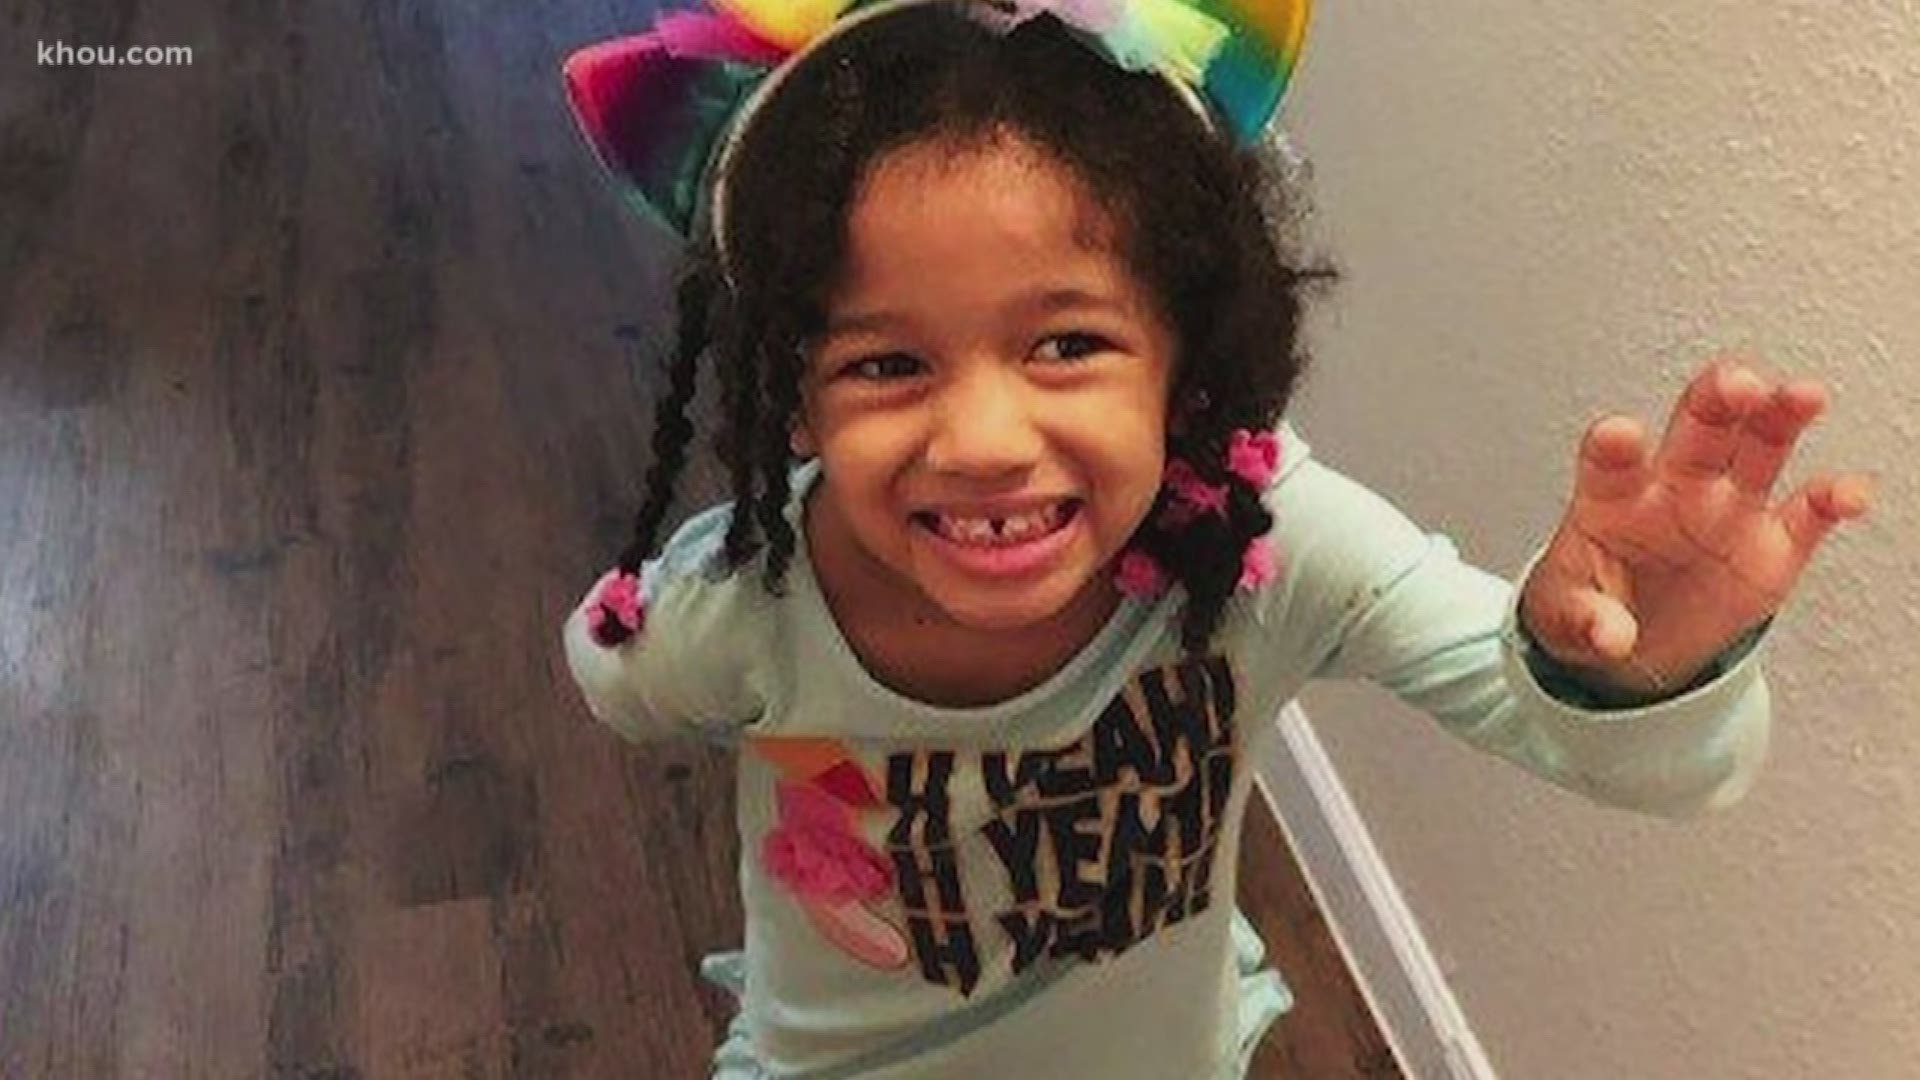 Did you miss the 10 p.m. headlines? Houston Police Chief Art Acevedo believes Derion Vence knows more about Maleah Davis than he's admitted, and some lucky Astros fans won big prizes with the "Ellen" show at Minute Maid Park. Here are more top headlines tonight.